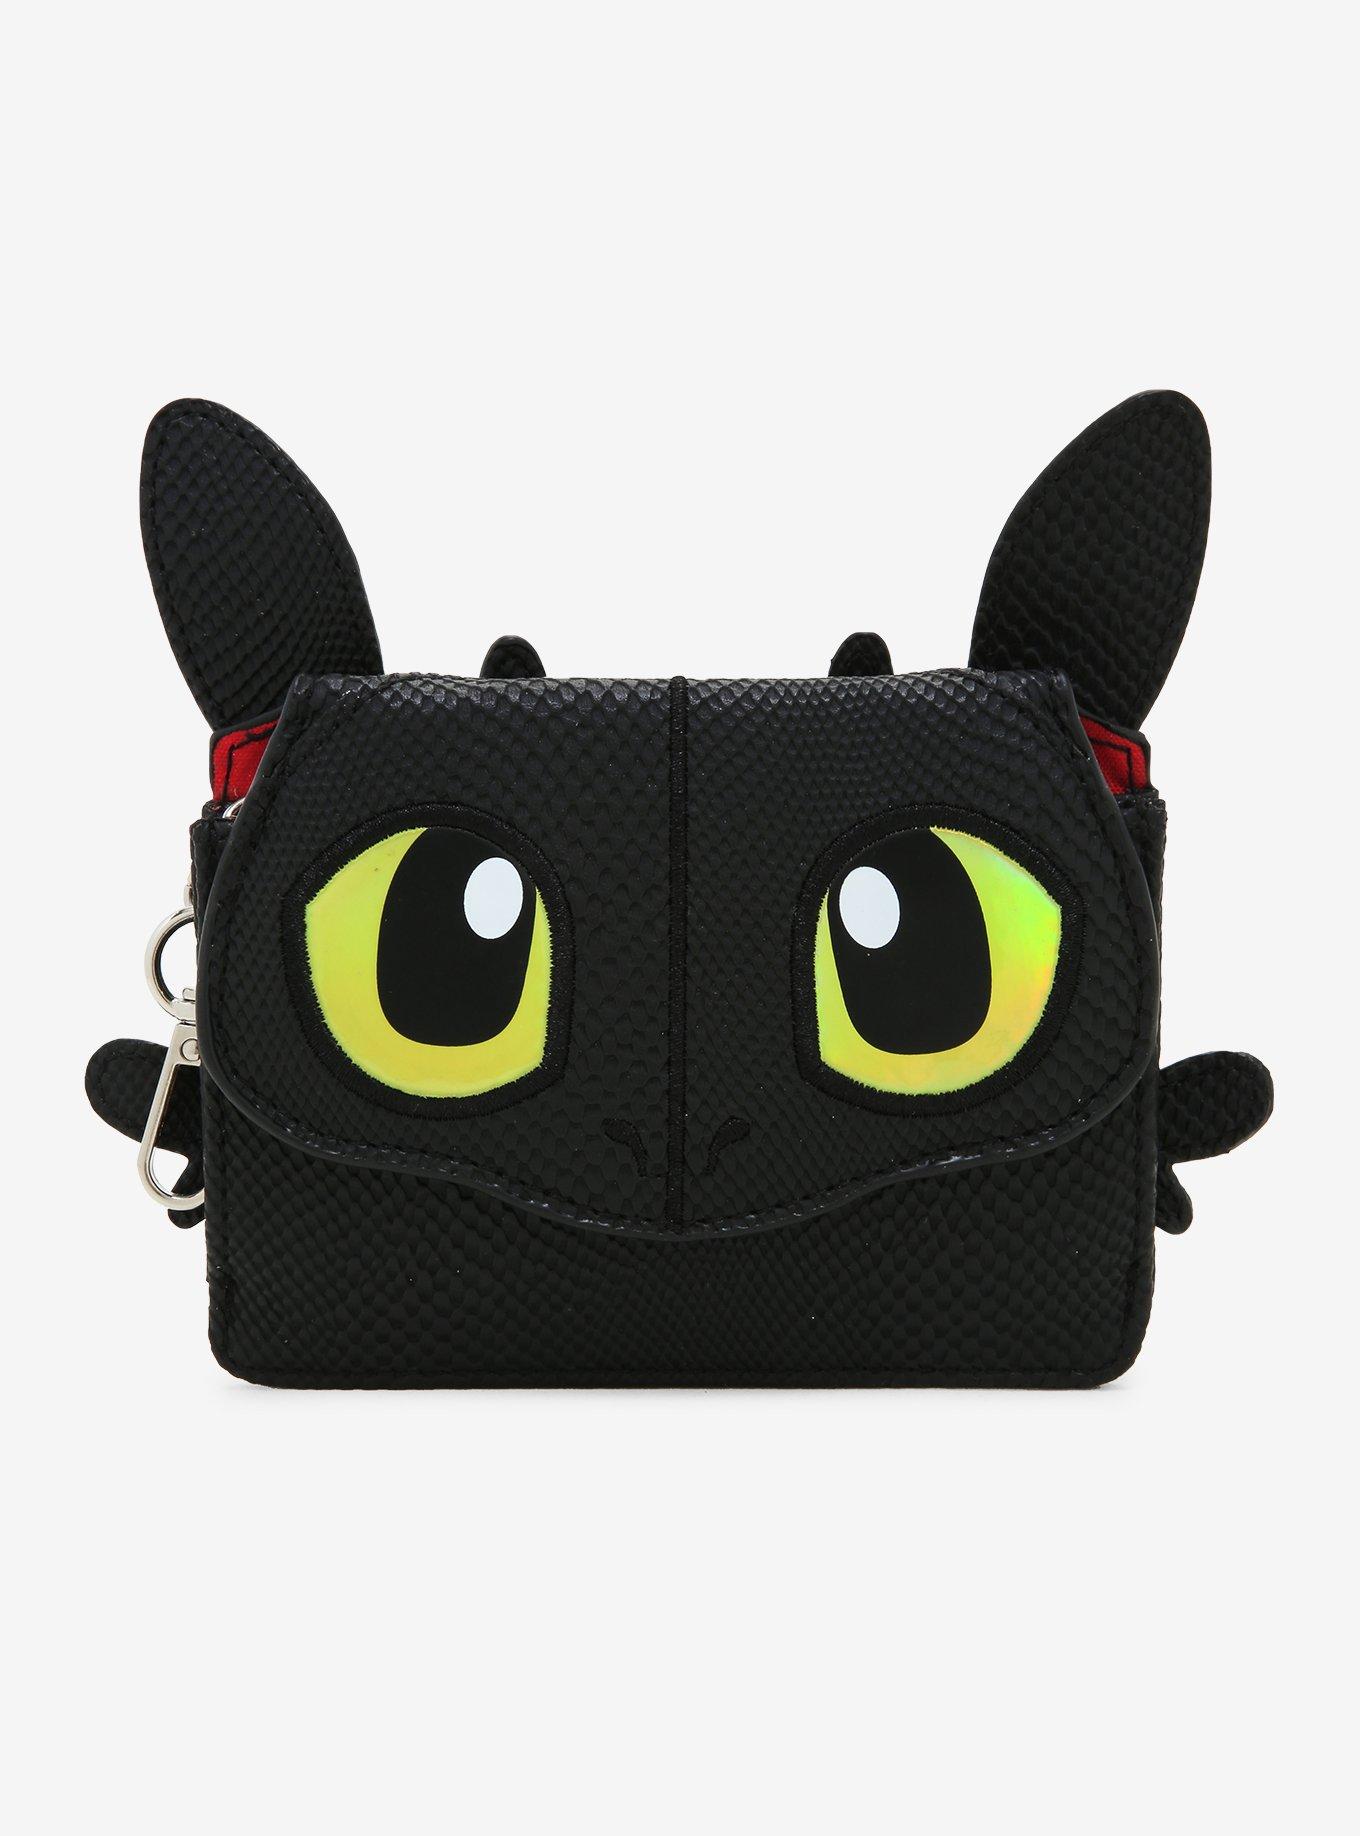 How To Train Your Dragon Toothless Wallet, , hi-res